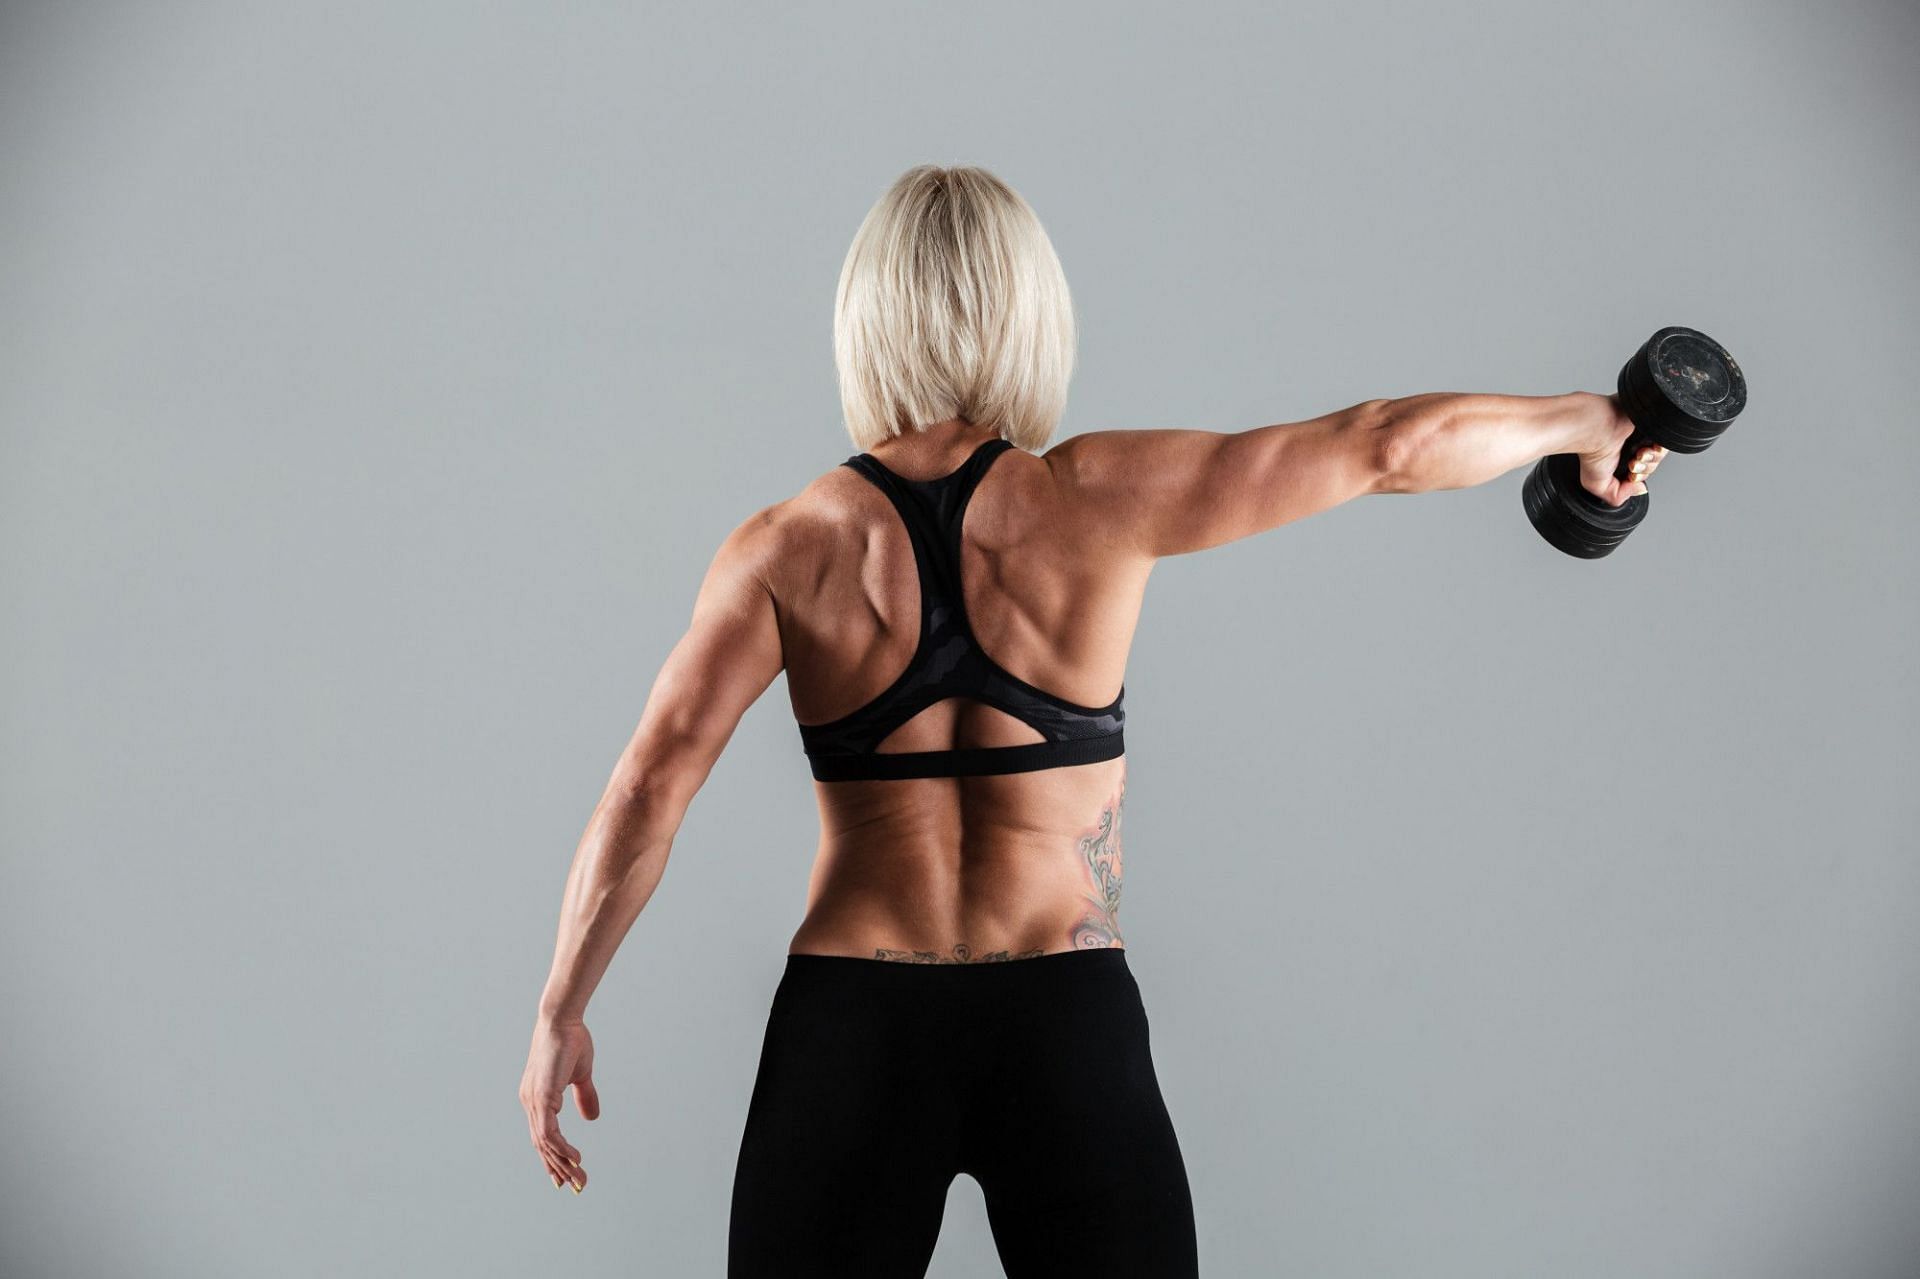 Lat raises are one of the best workouts for bigger shoulders.(Image via Freepik)